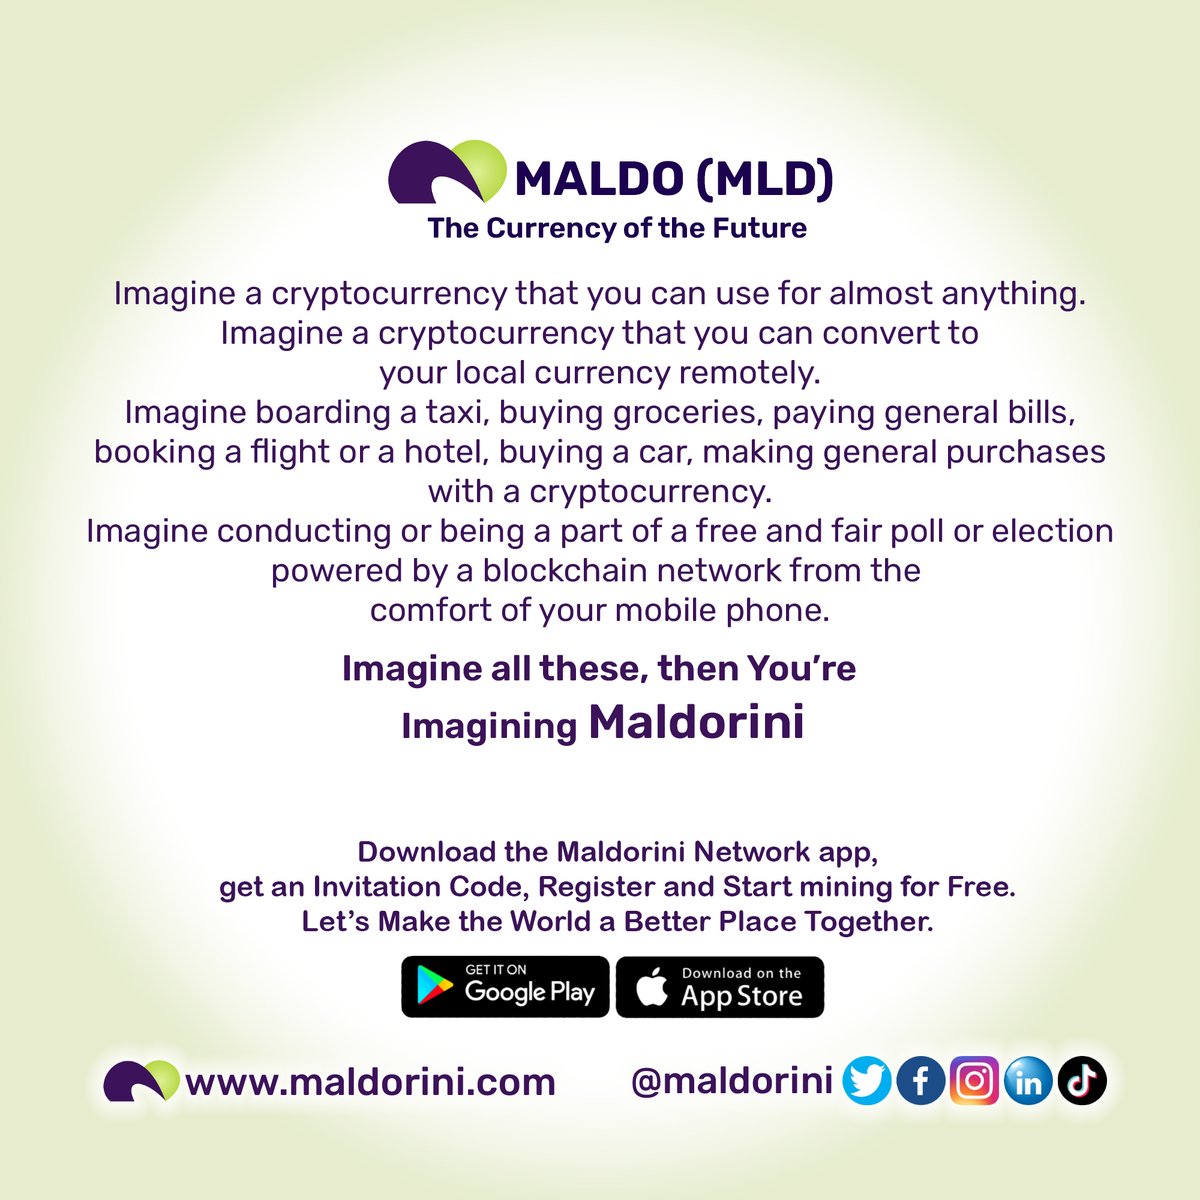 This are just some of the few things that Maldorinians will enjoy when we get to the mainnet. Maldorini has many amazing features and uses that will be revealed soon. On the quest of becoming the No. 1 cryptocurrency in the world. #maldorini #cryptocurrency #cryptocurrencies